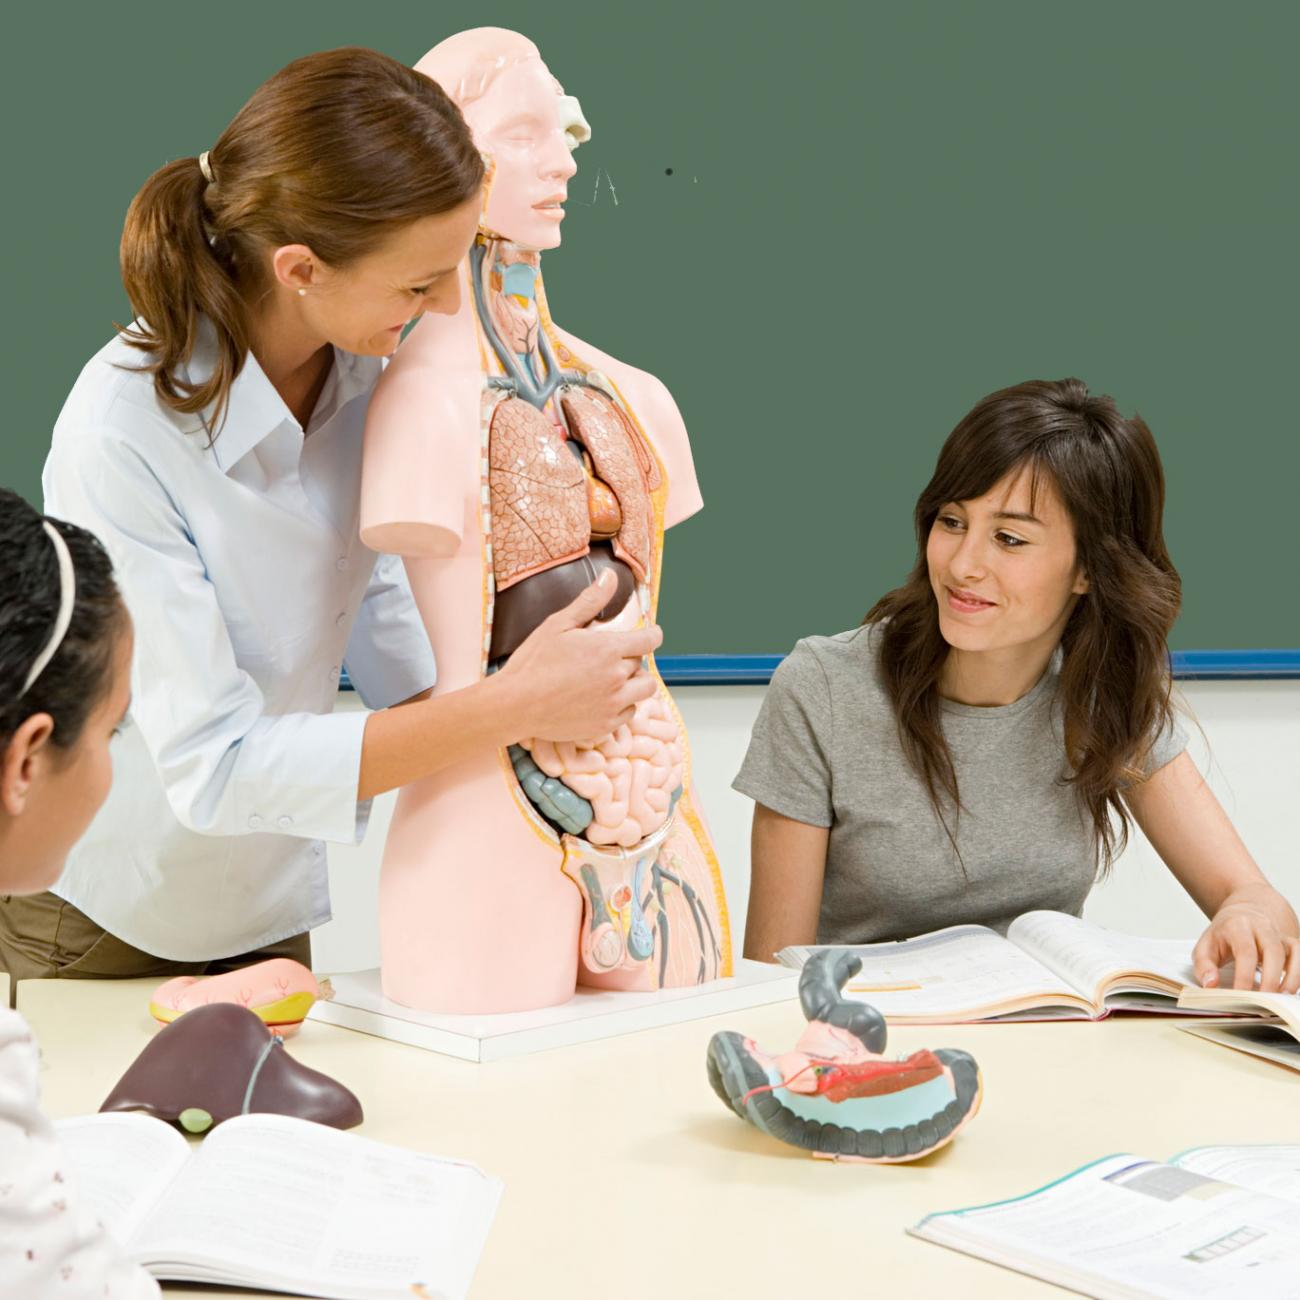 a photo of students learning about anatomy in a classroom